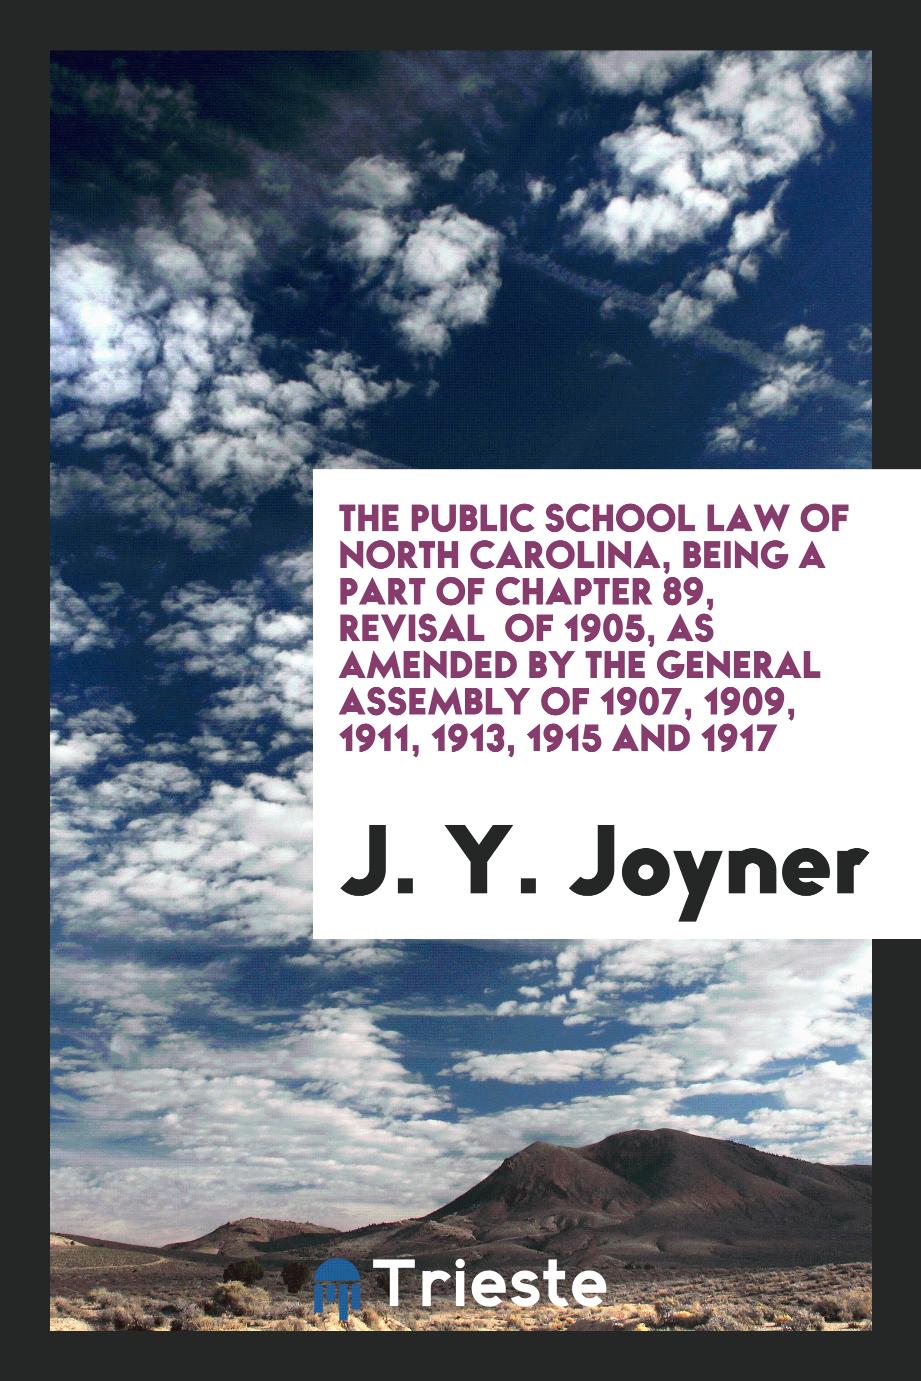 The Public School Law of North Carolina, Being a Part of Chapter 89, Revisal of 1905, as Amended by the General Assembly of 1907, 1909, 1911, 1913, 1915 and 1917